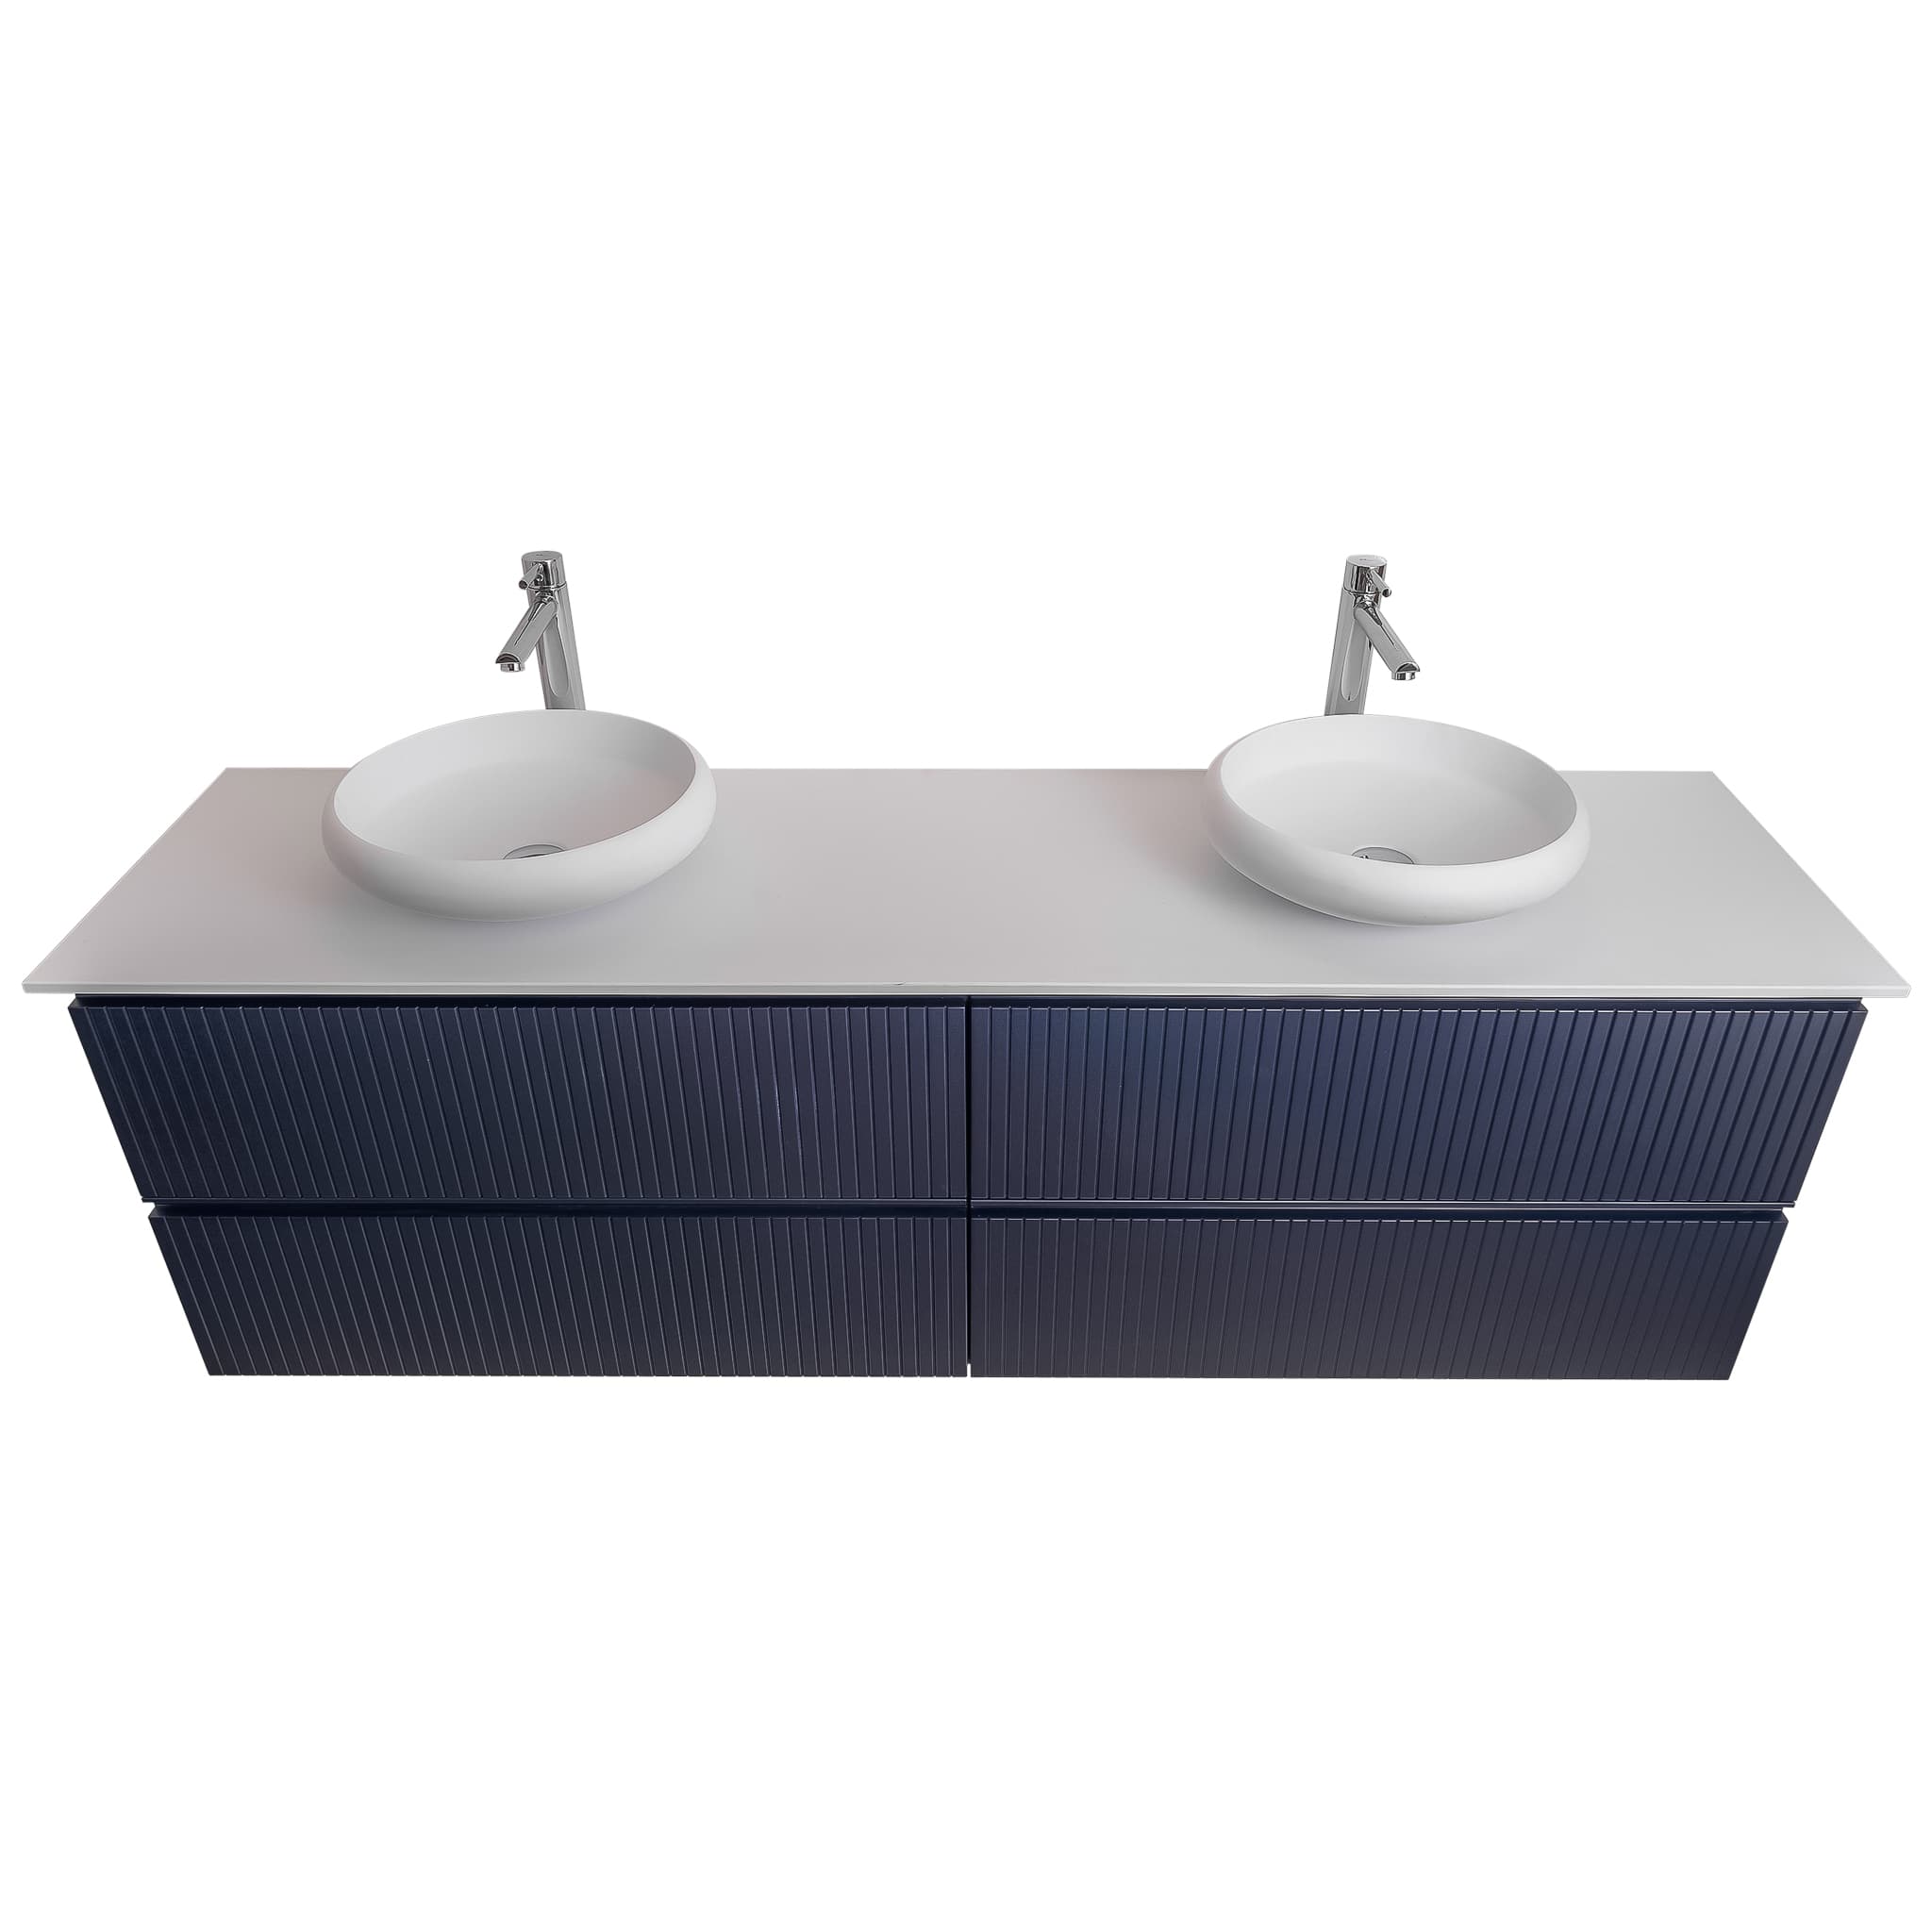 Ares 63 Matte Navy Blue Cabinet, Solid Surface Flat White Counter And Two Round Solid Surface White Basin 1153, Wall Mounted Modern Vanity Set